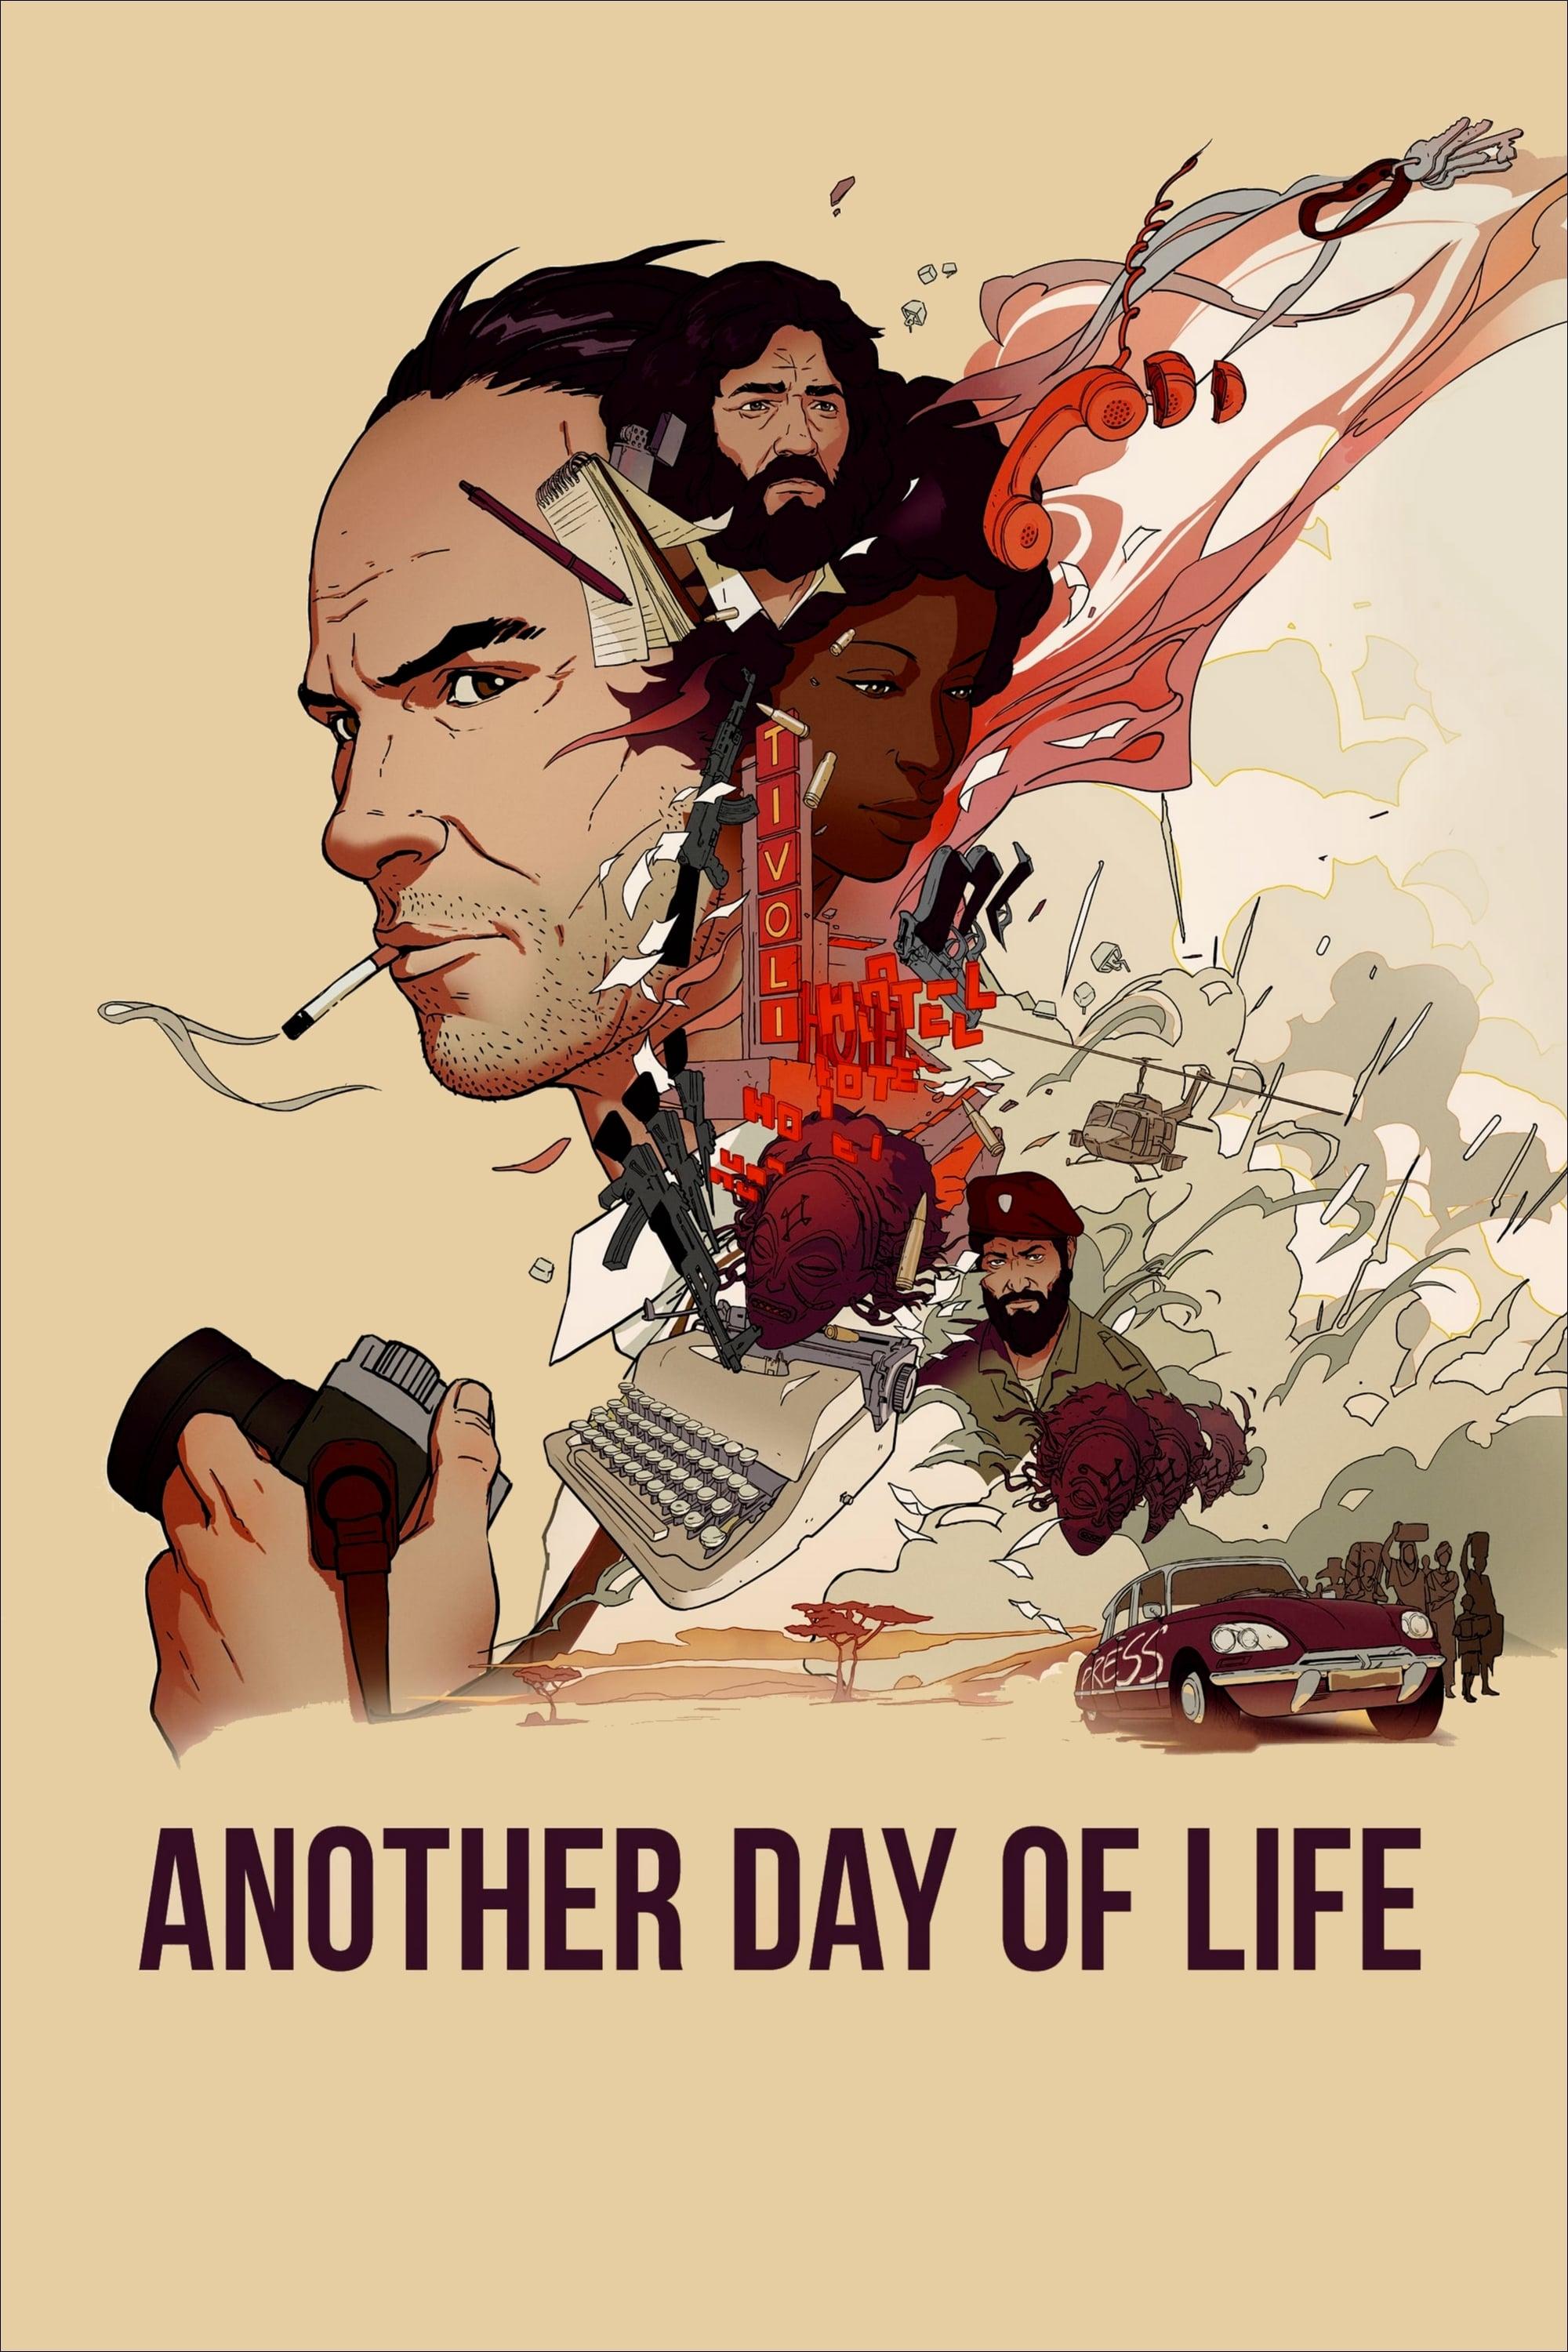 Another Day of Life poster